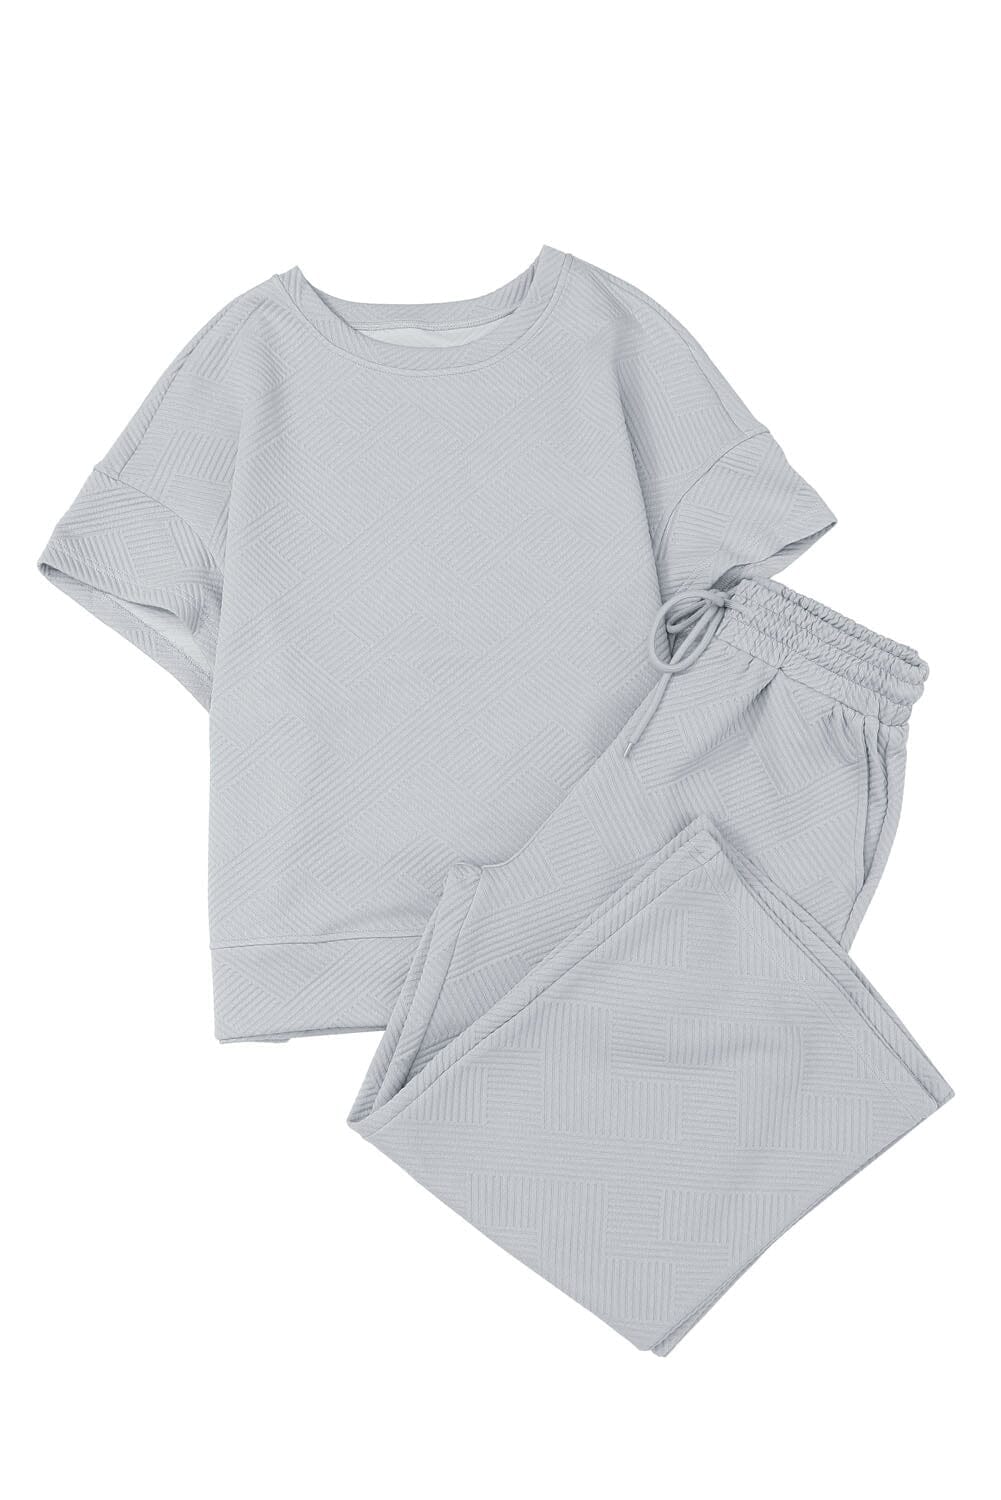 Textured Slouchy Set - Short Sleeves Loungewear Lover Small Grey 